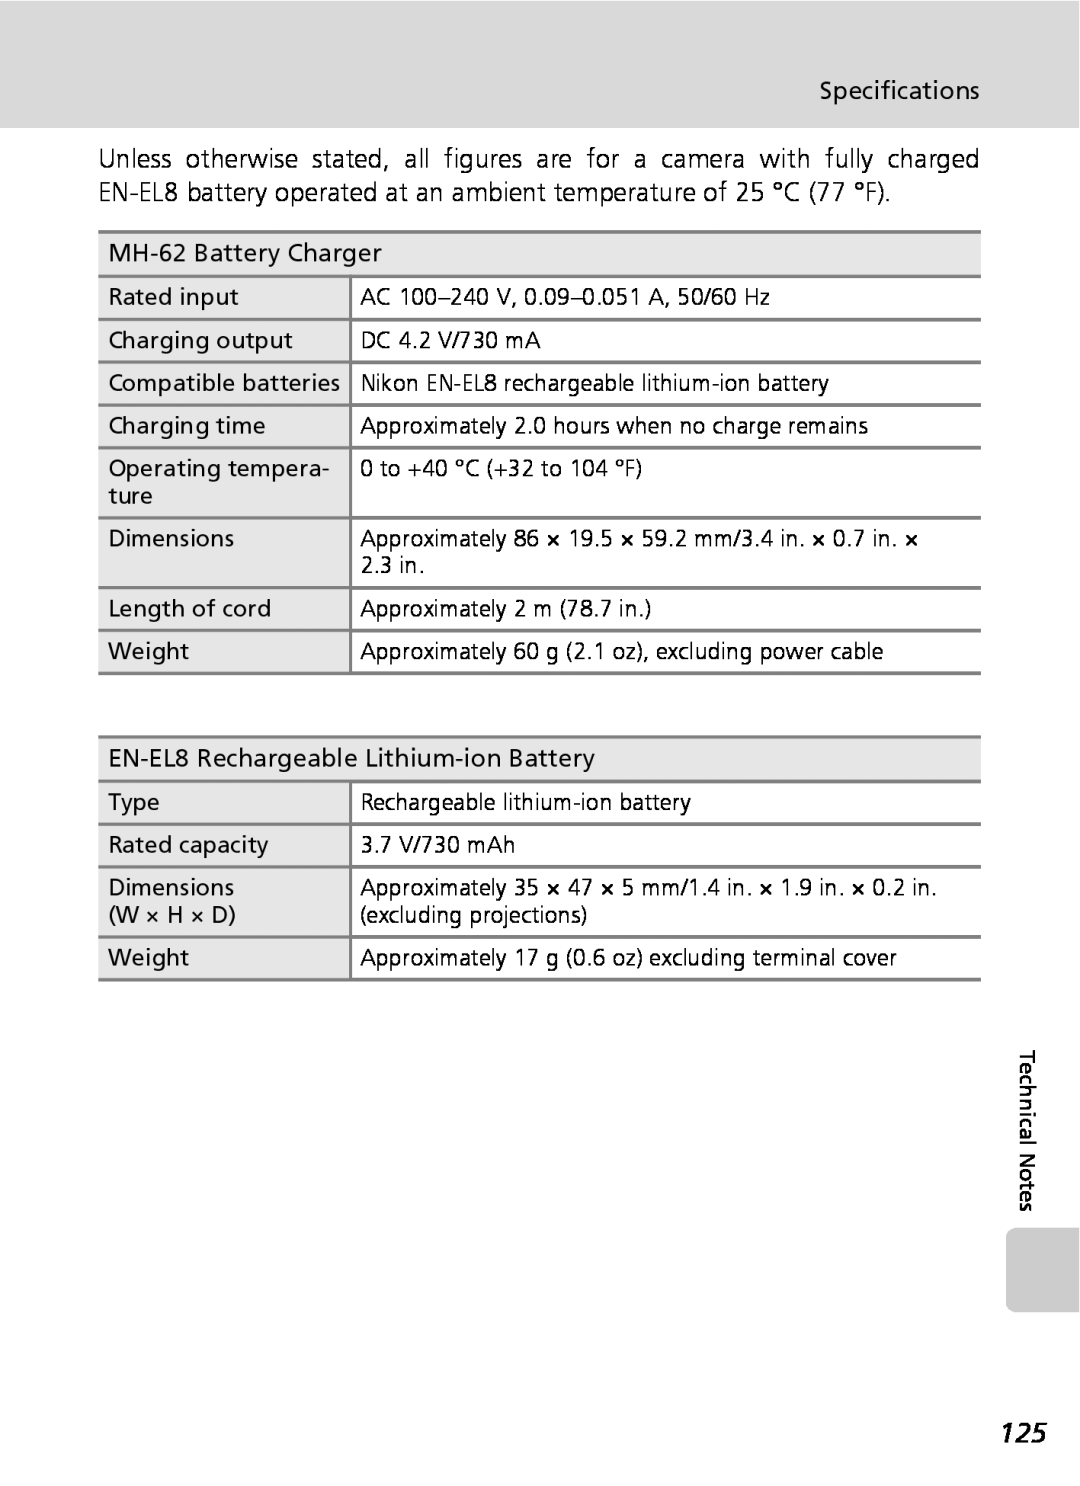 Nikon COOLPIXS9 manual Specifications, MH-62Battery Charger, EN-EL8Rechargeable Lithium-ionBattery 